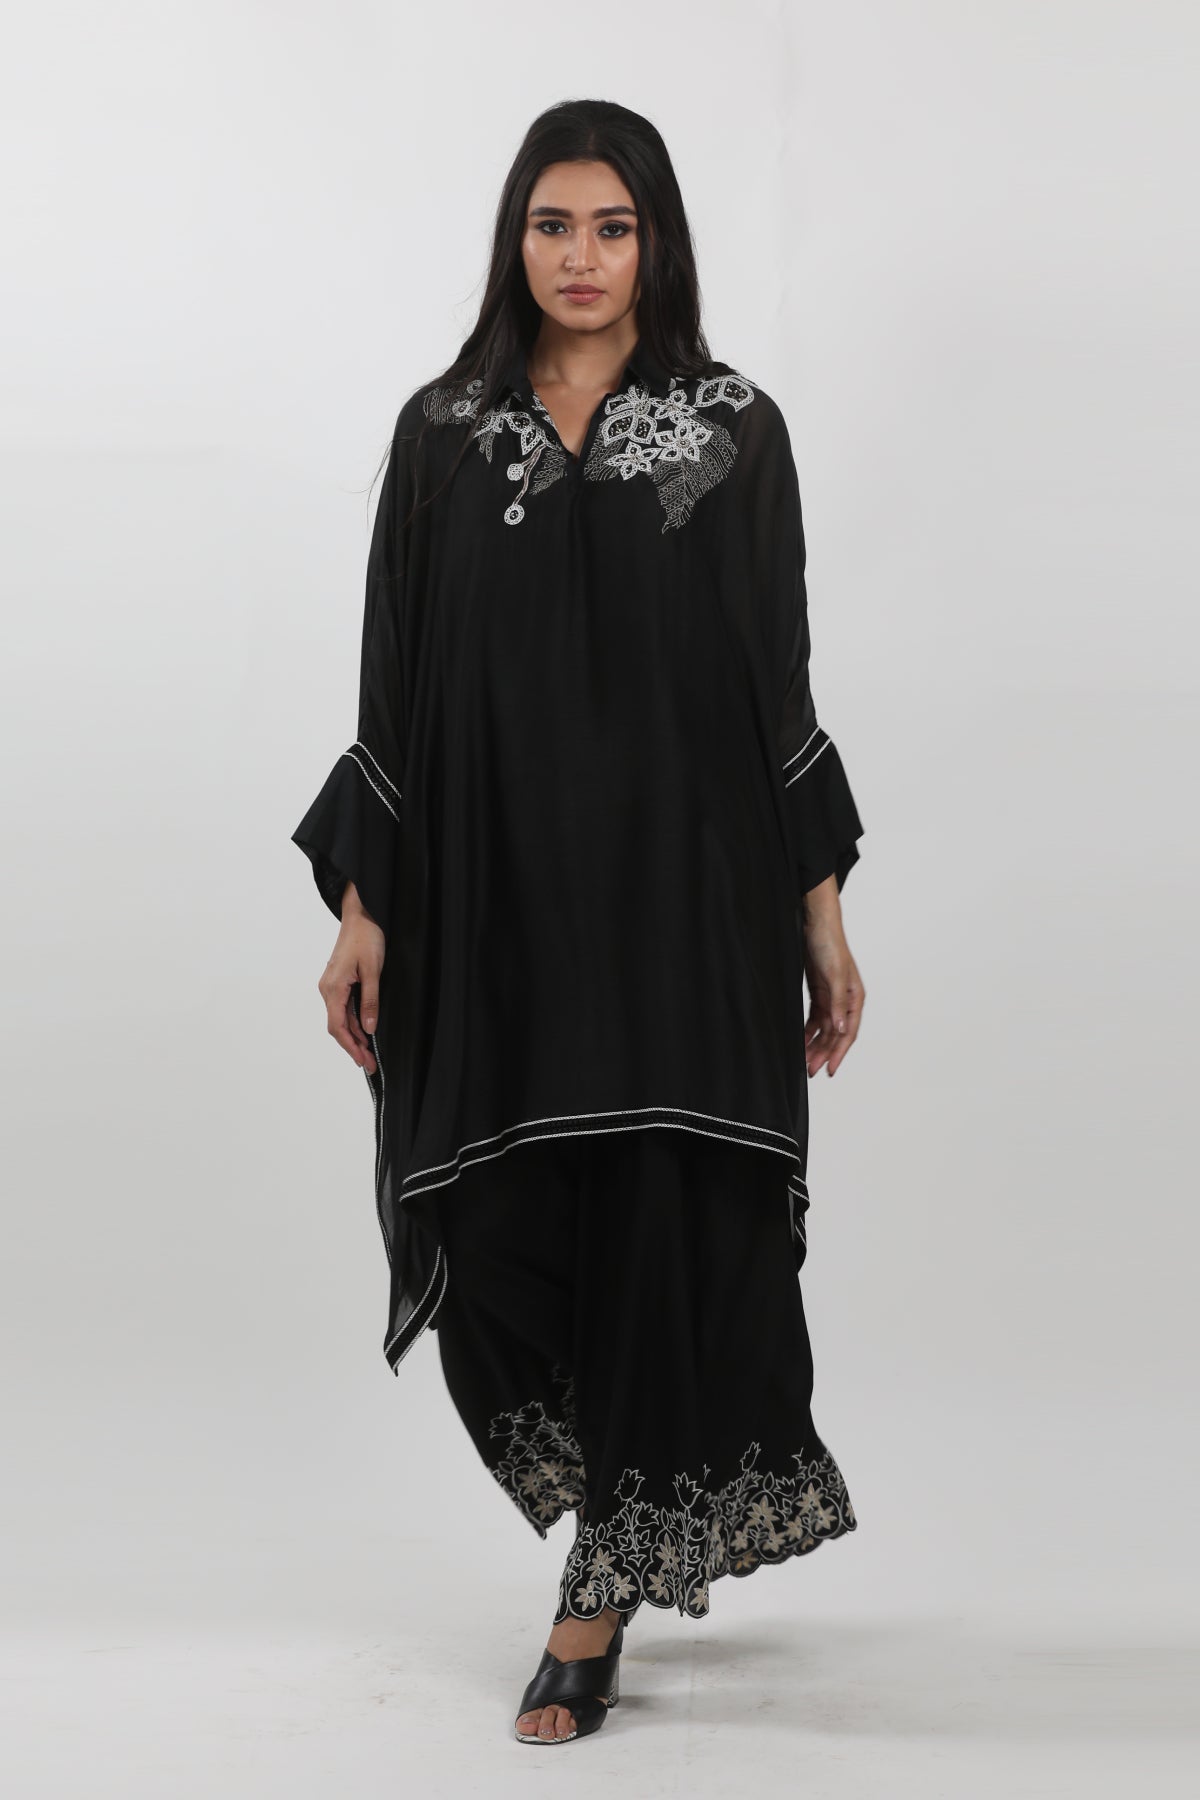 Black Cape Tunic with hand embroiderey around collar & black lace trim details